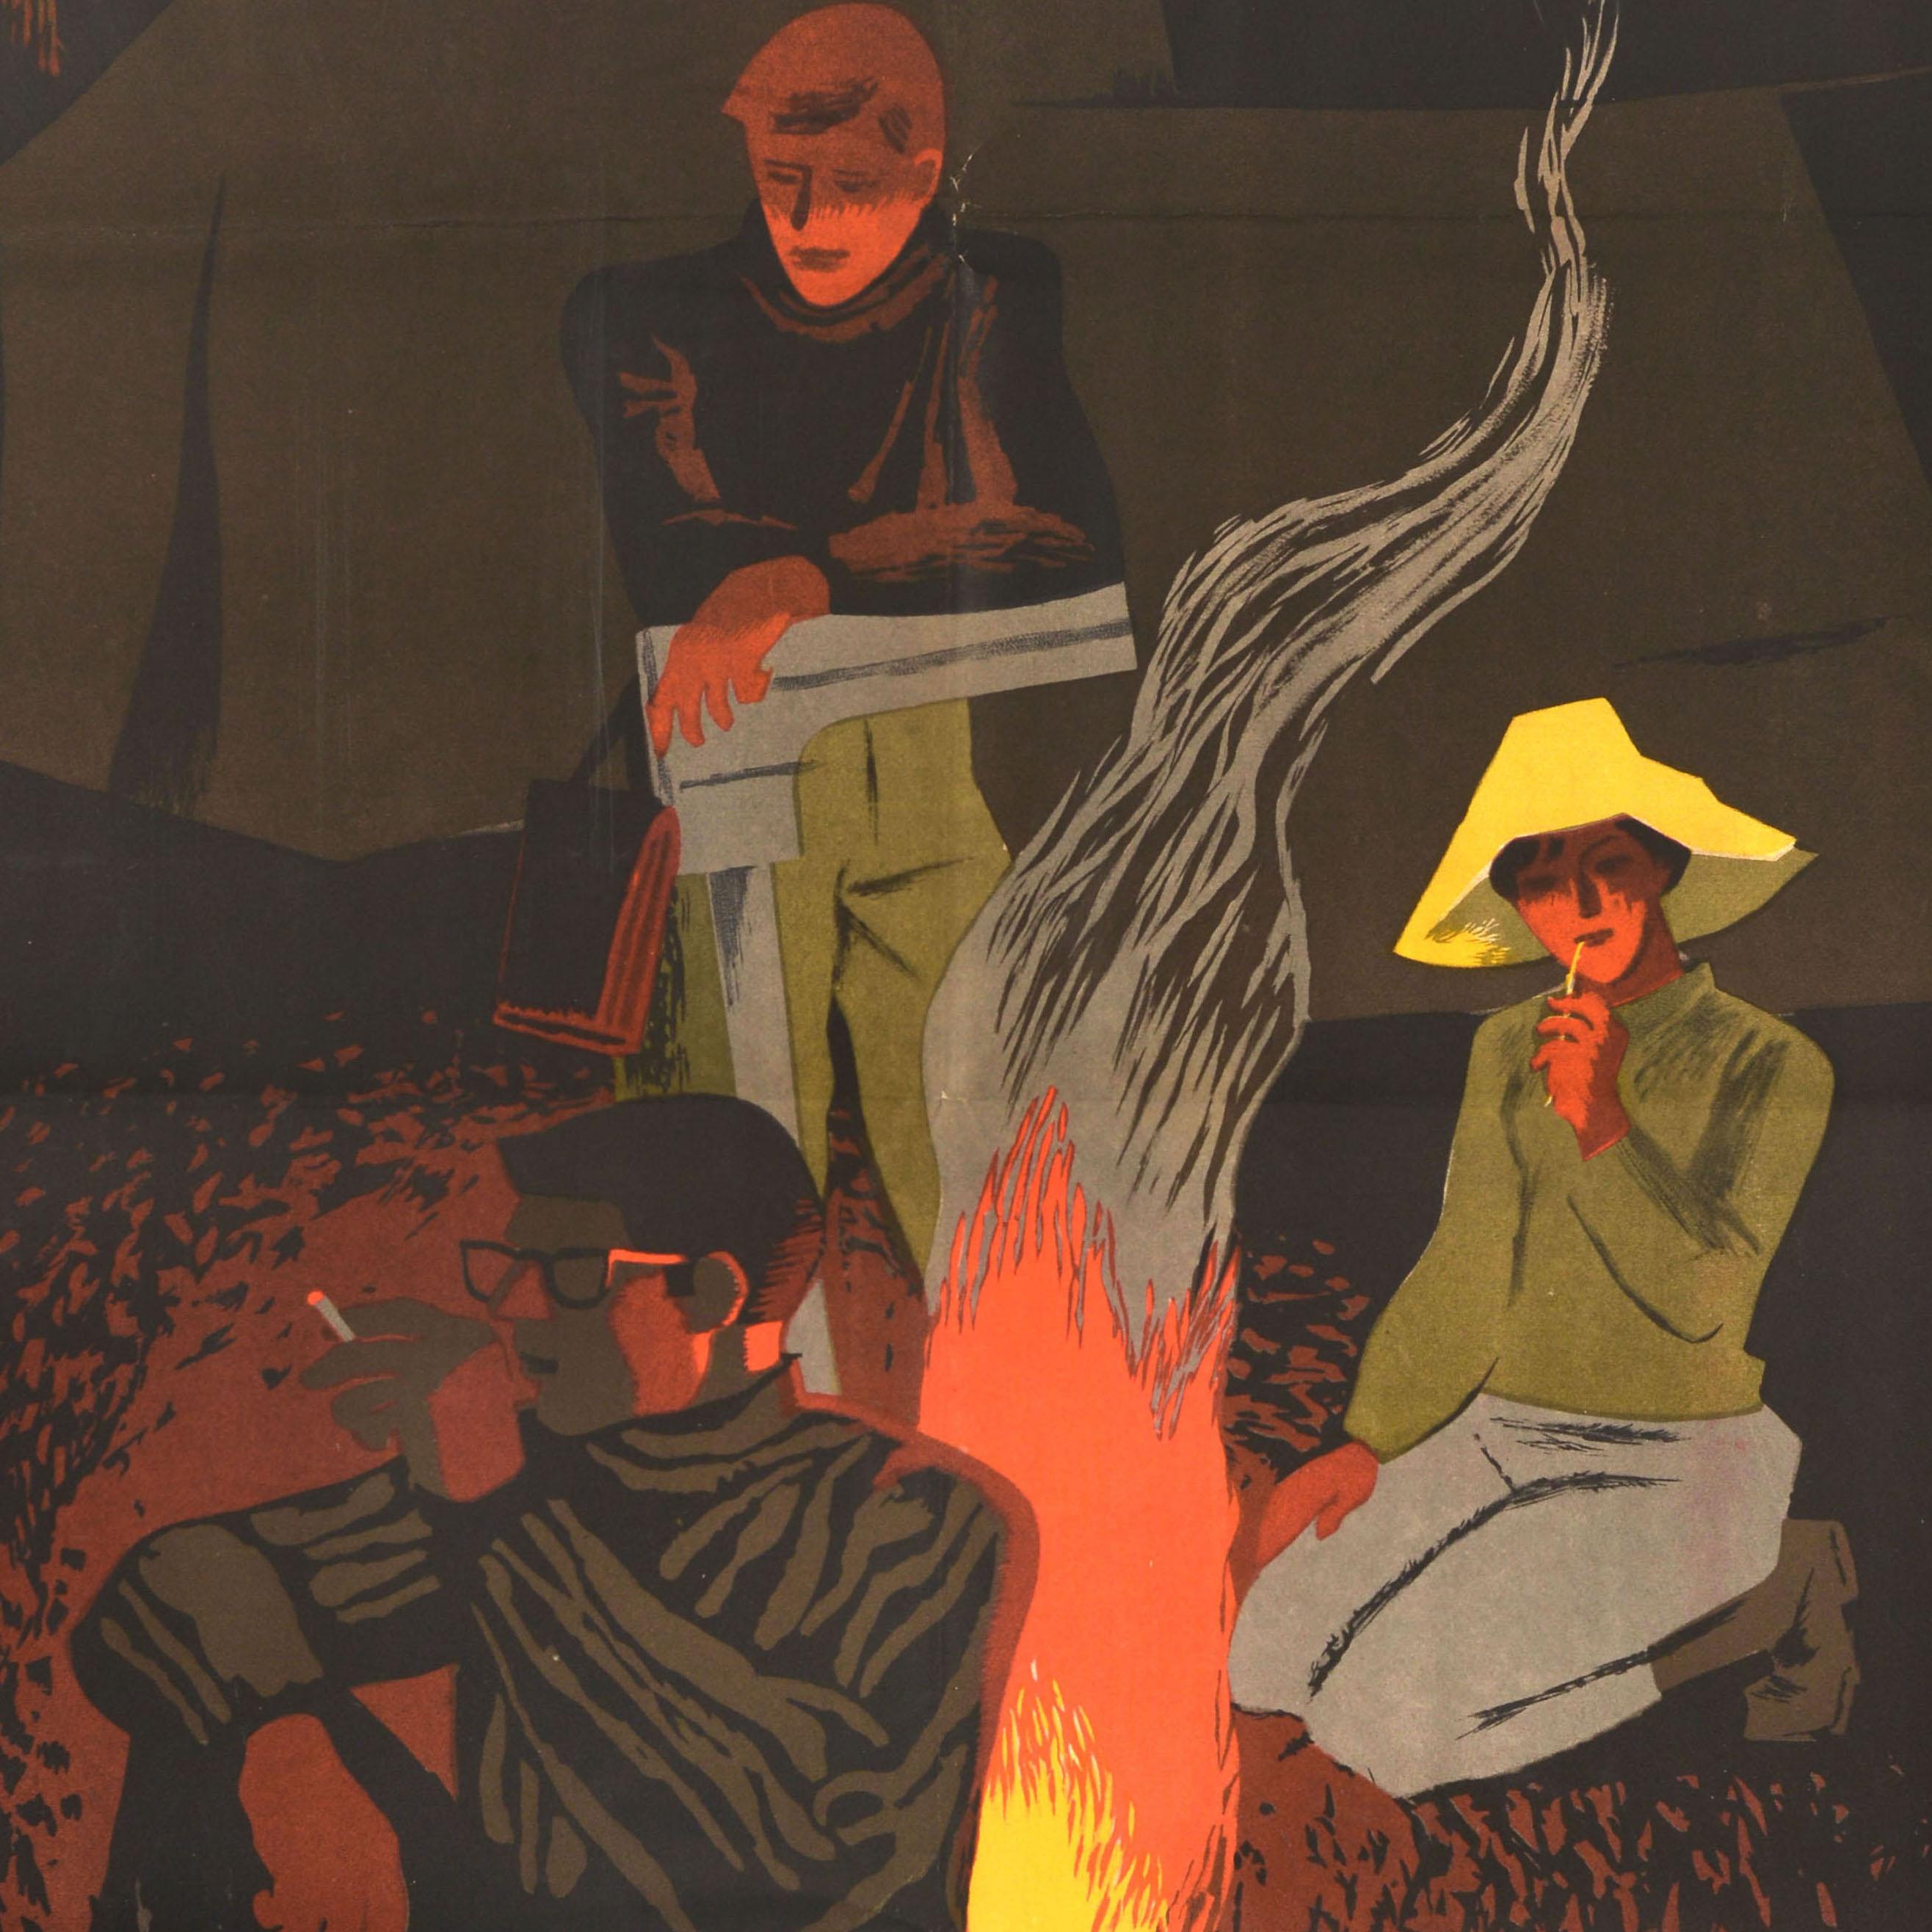 Original vintage movie poster for a 1963 Soviet adventure film. Paths of Altai - directed by Yuri Pobedonostsev and based on a novel of the same name by Sergei Zalygin. Great artwork showing three people sitting around a campsite fire with tents and